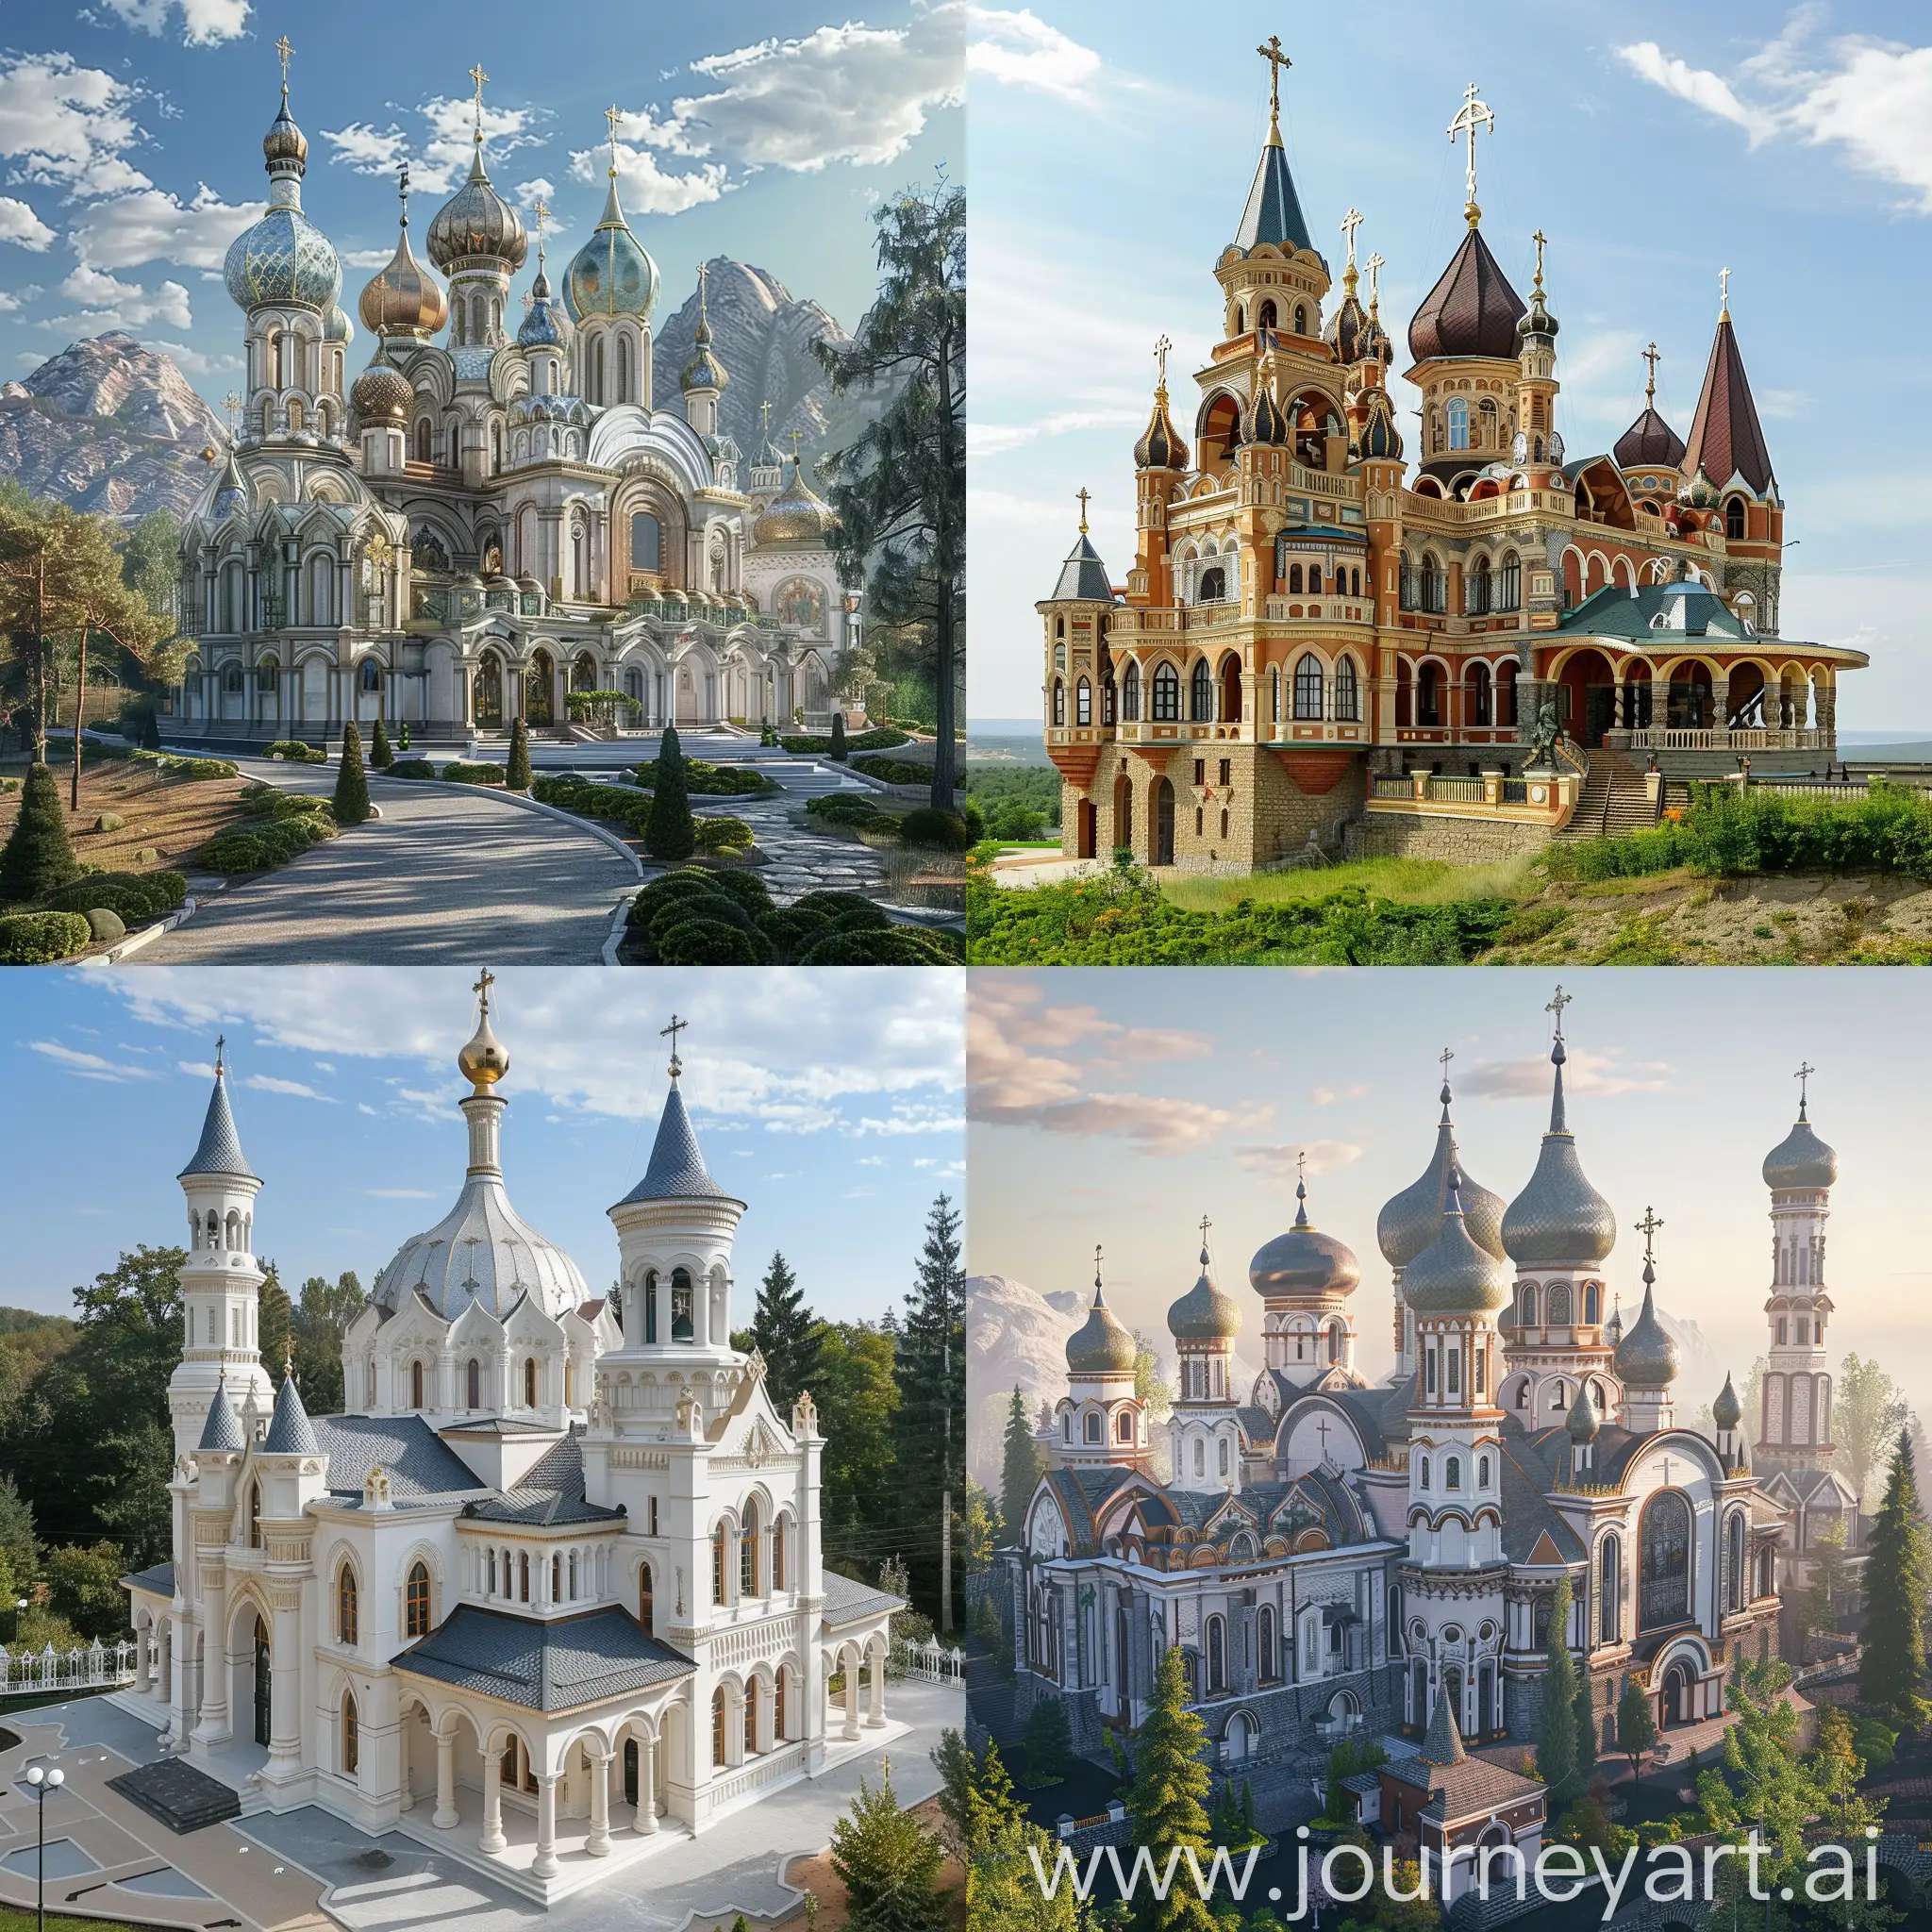 Epic huge palace Orthodox church with high towers, on which domes, Gothic, Baroque are located